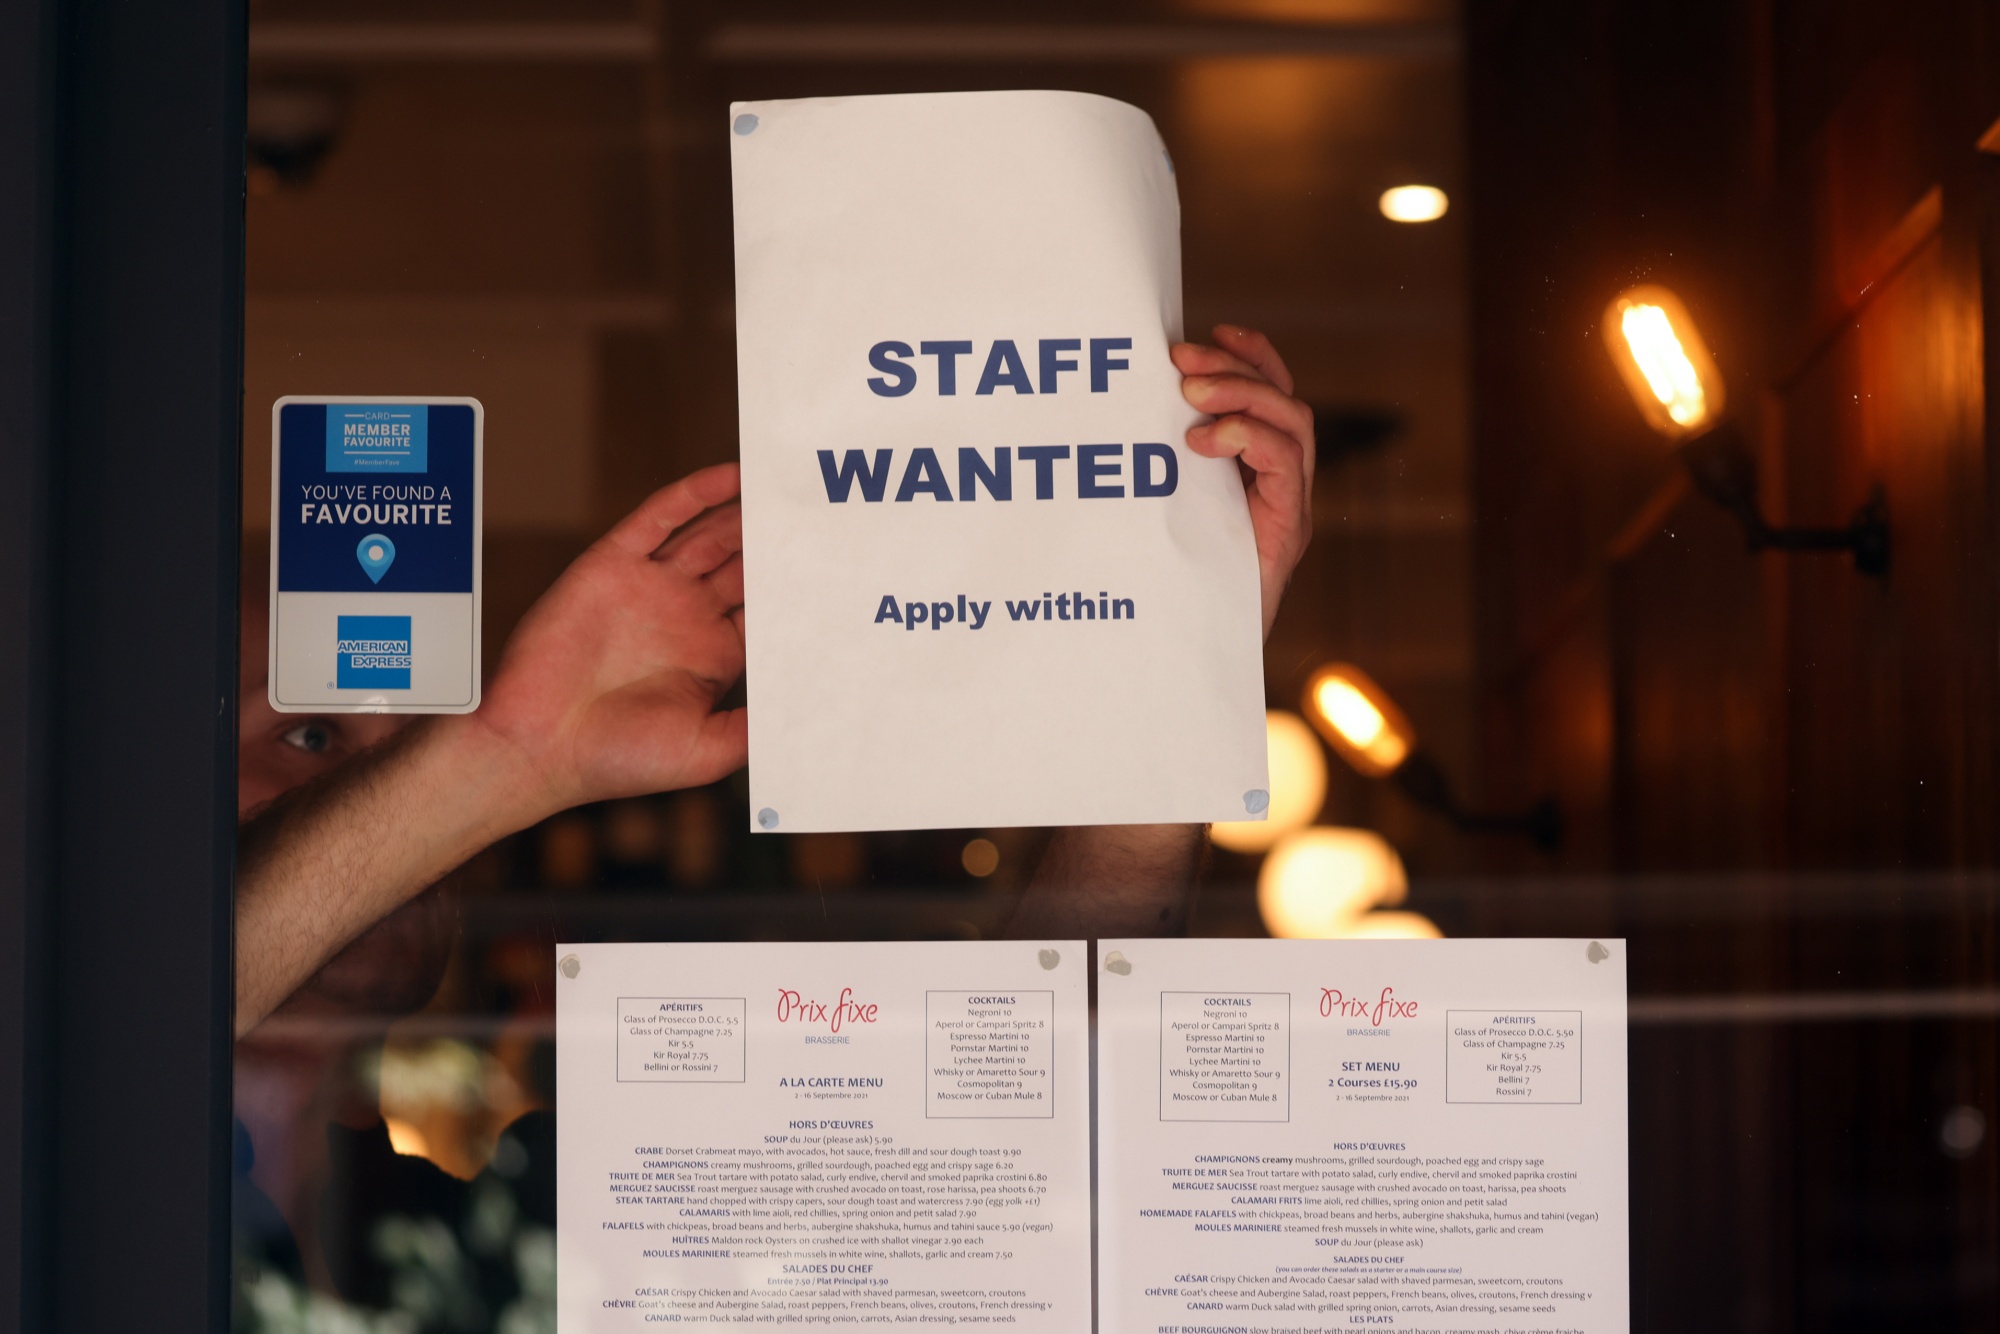 A staff wanted sign in the window of a restaurant in&nbsp;London.&nbsp;